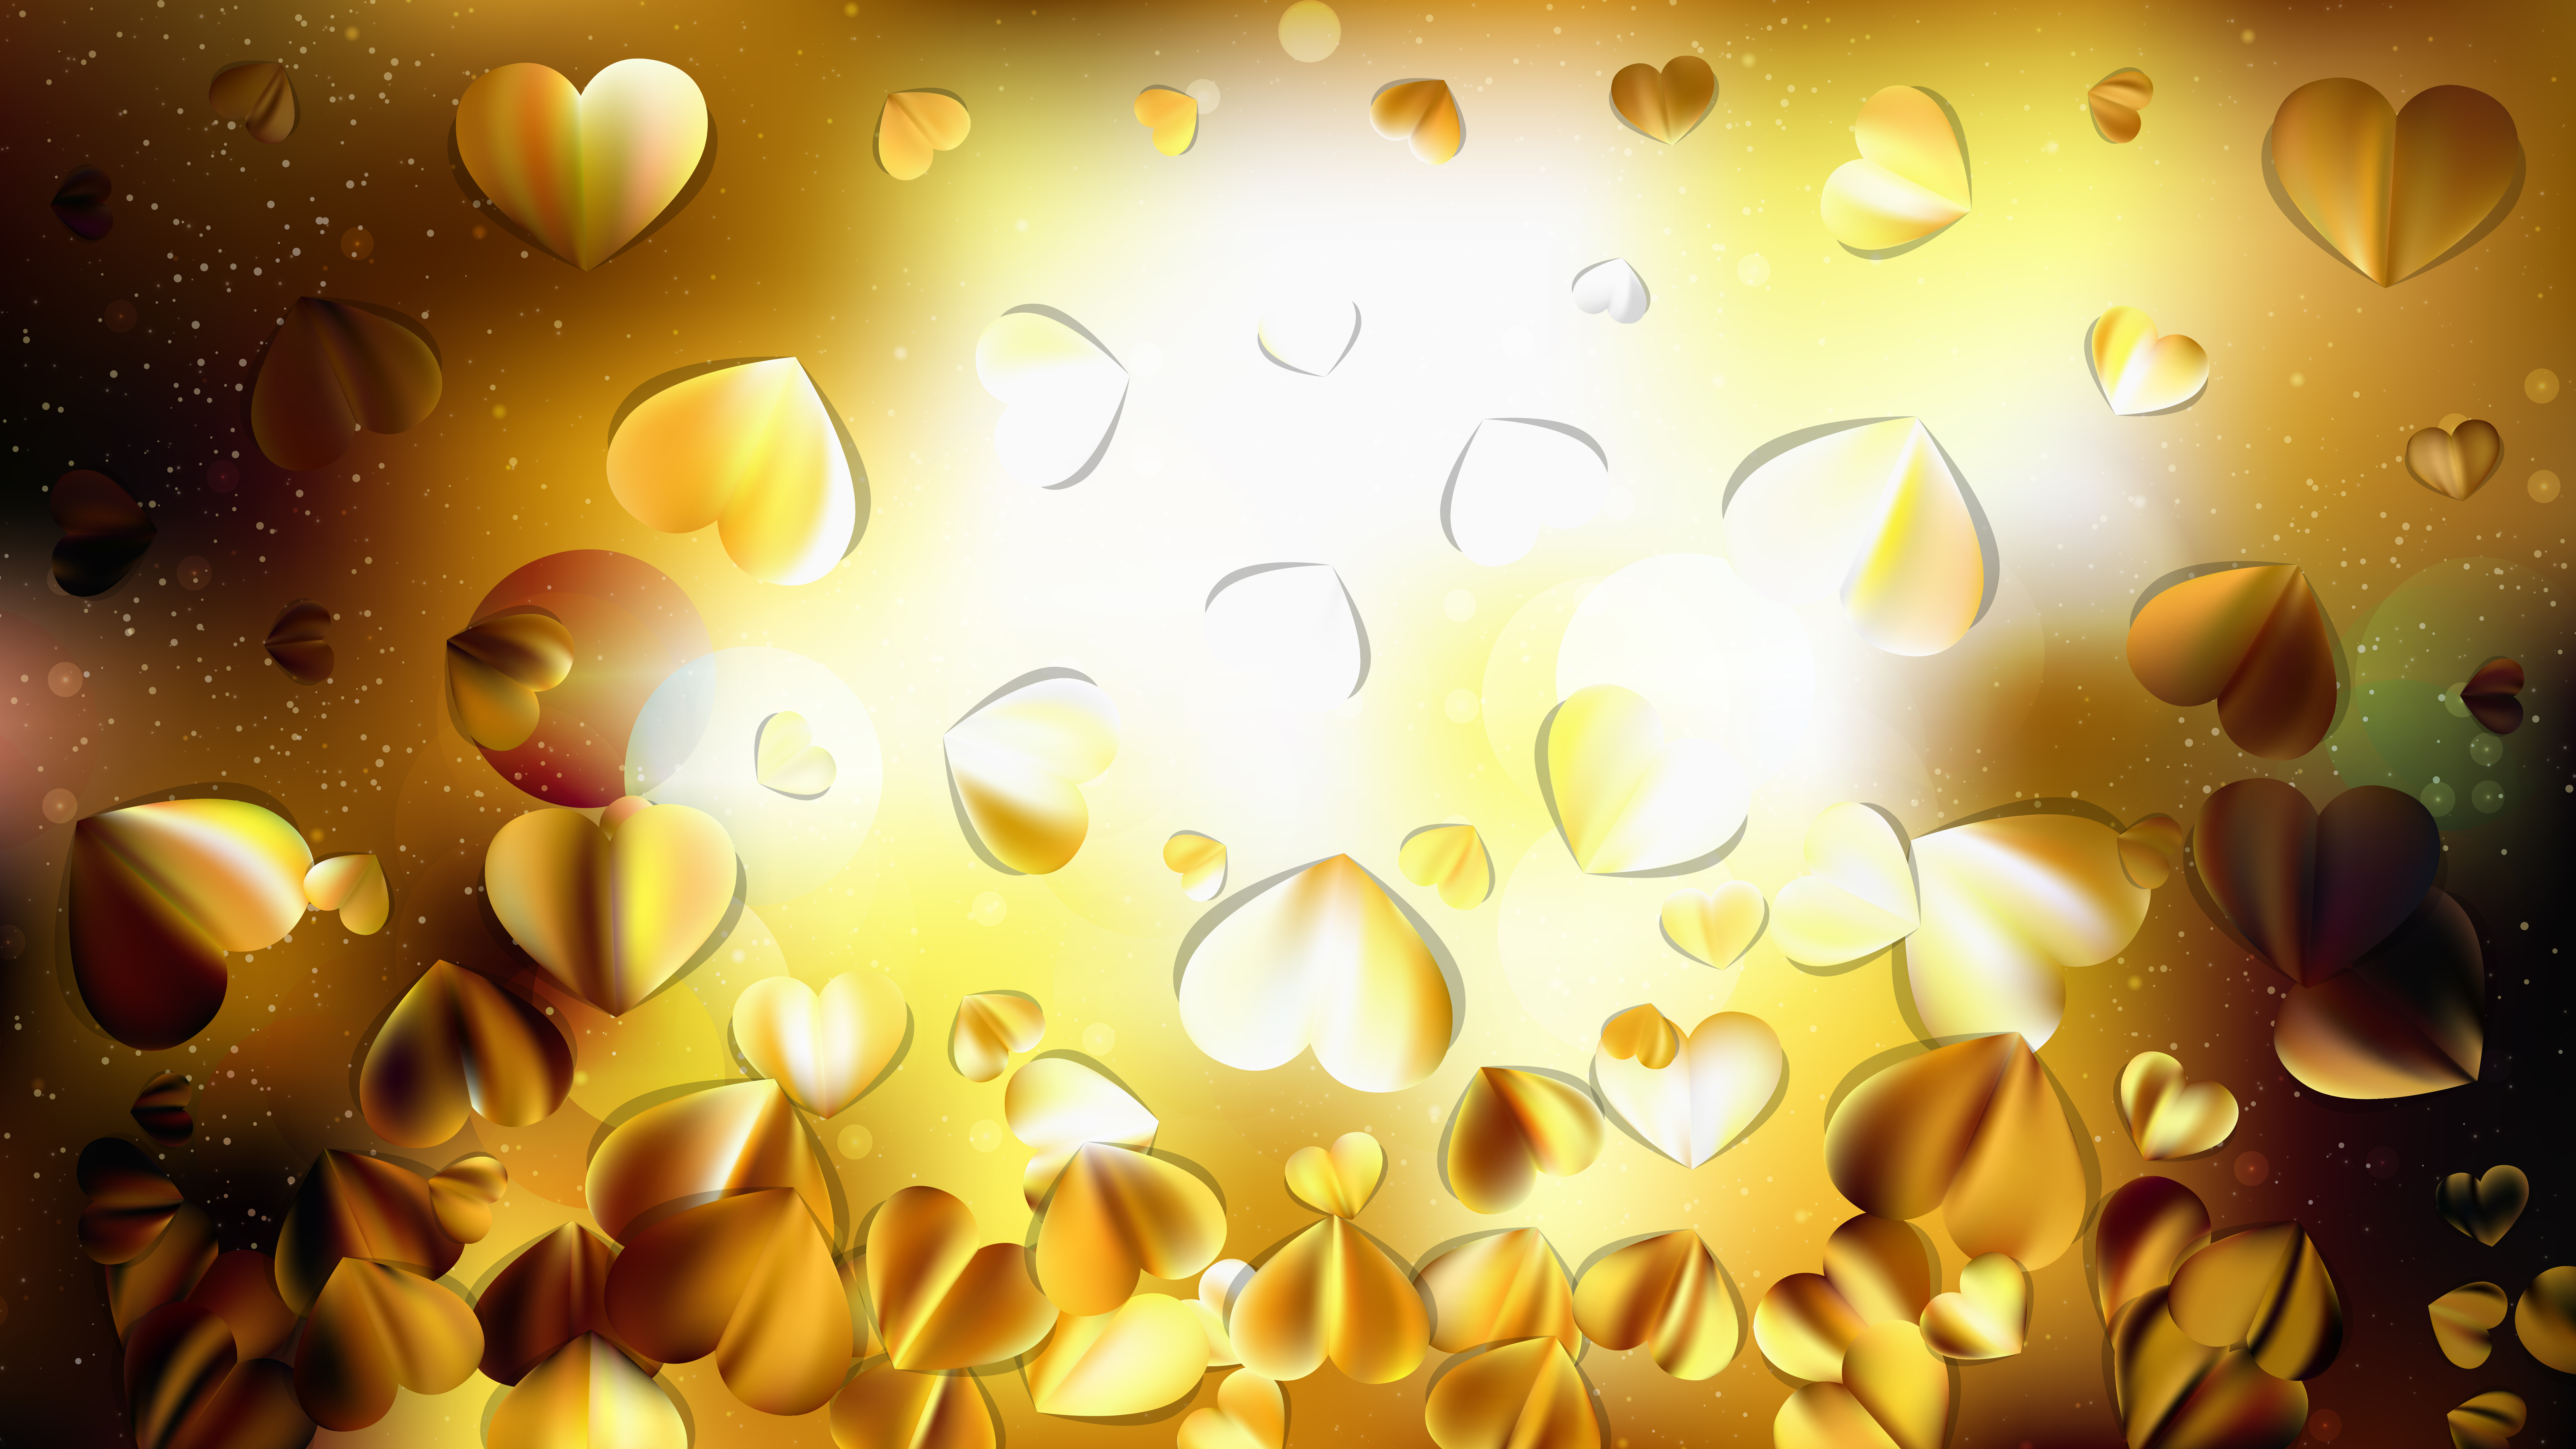 Free Gold Heart Background Vector